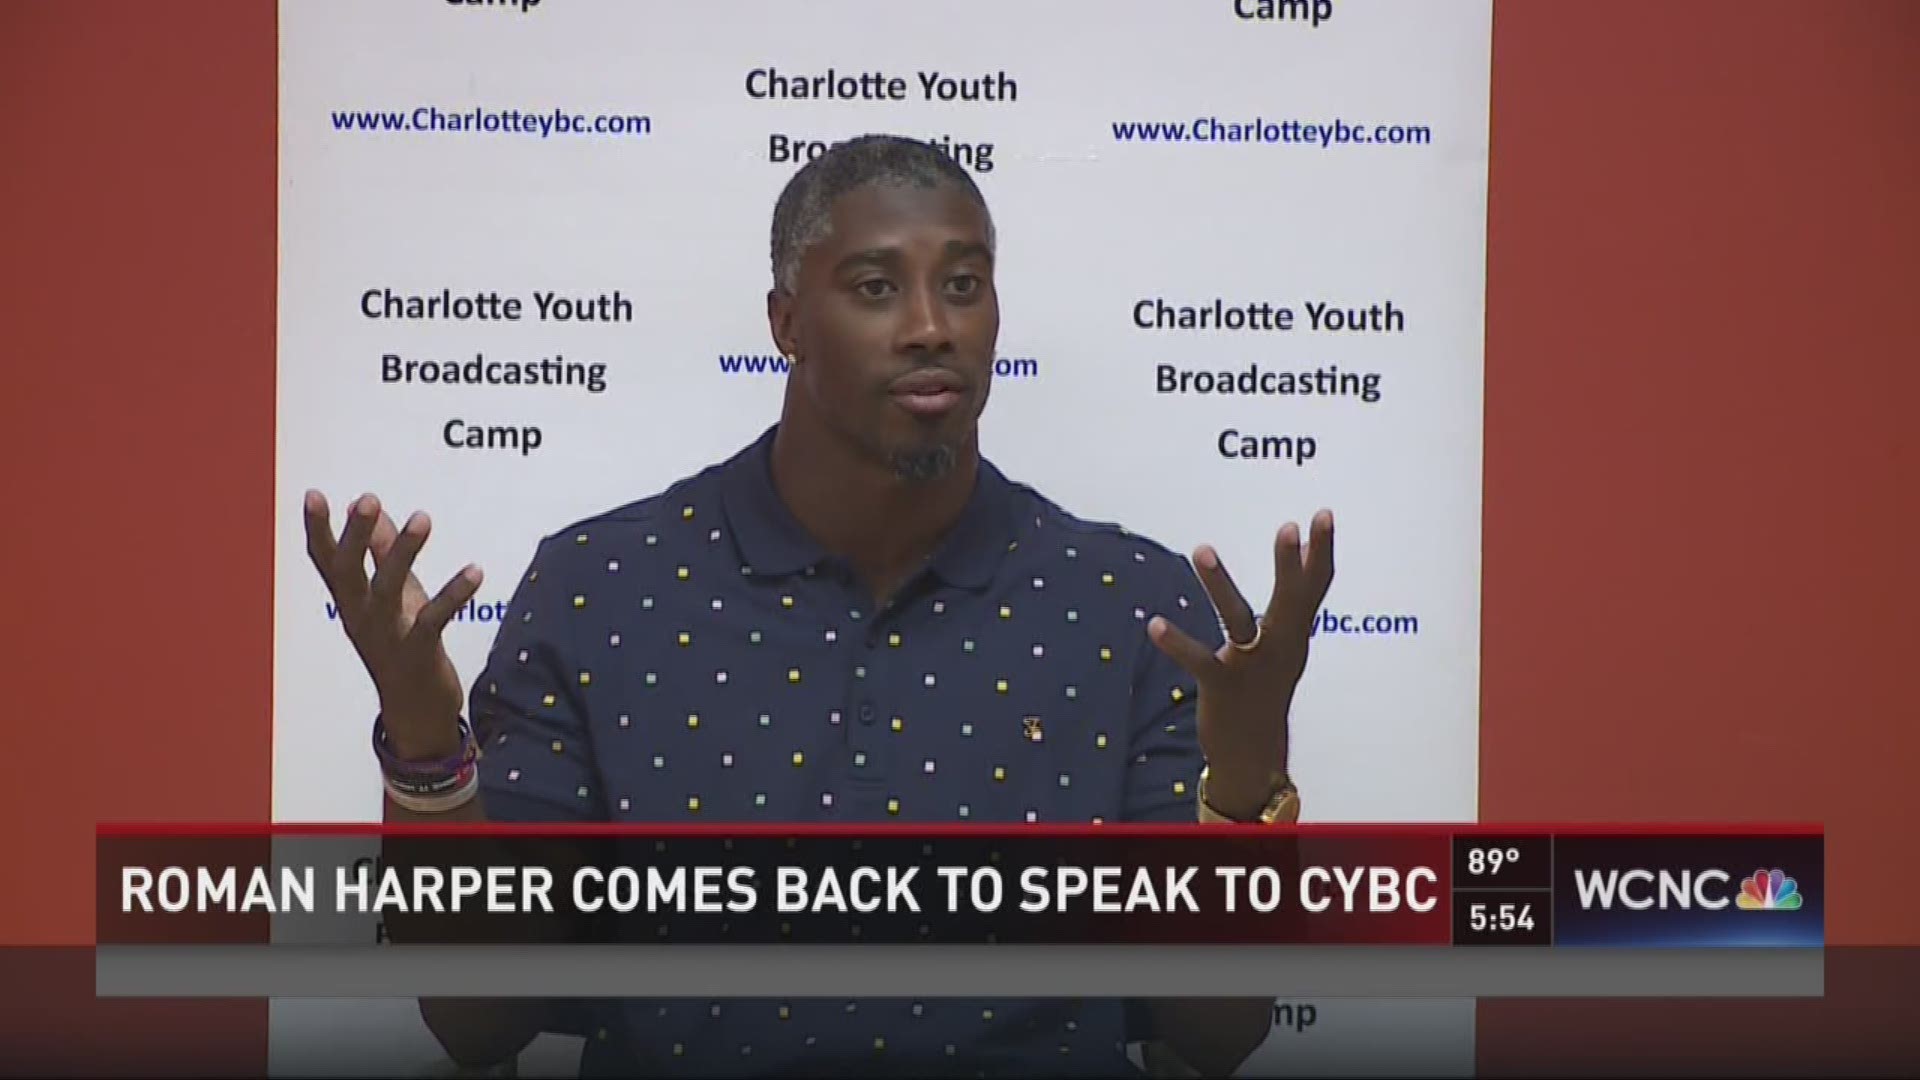 Charlotte Youth Broadcasting Camp